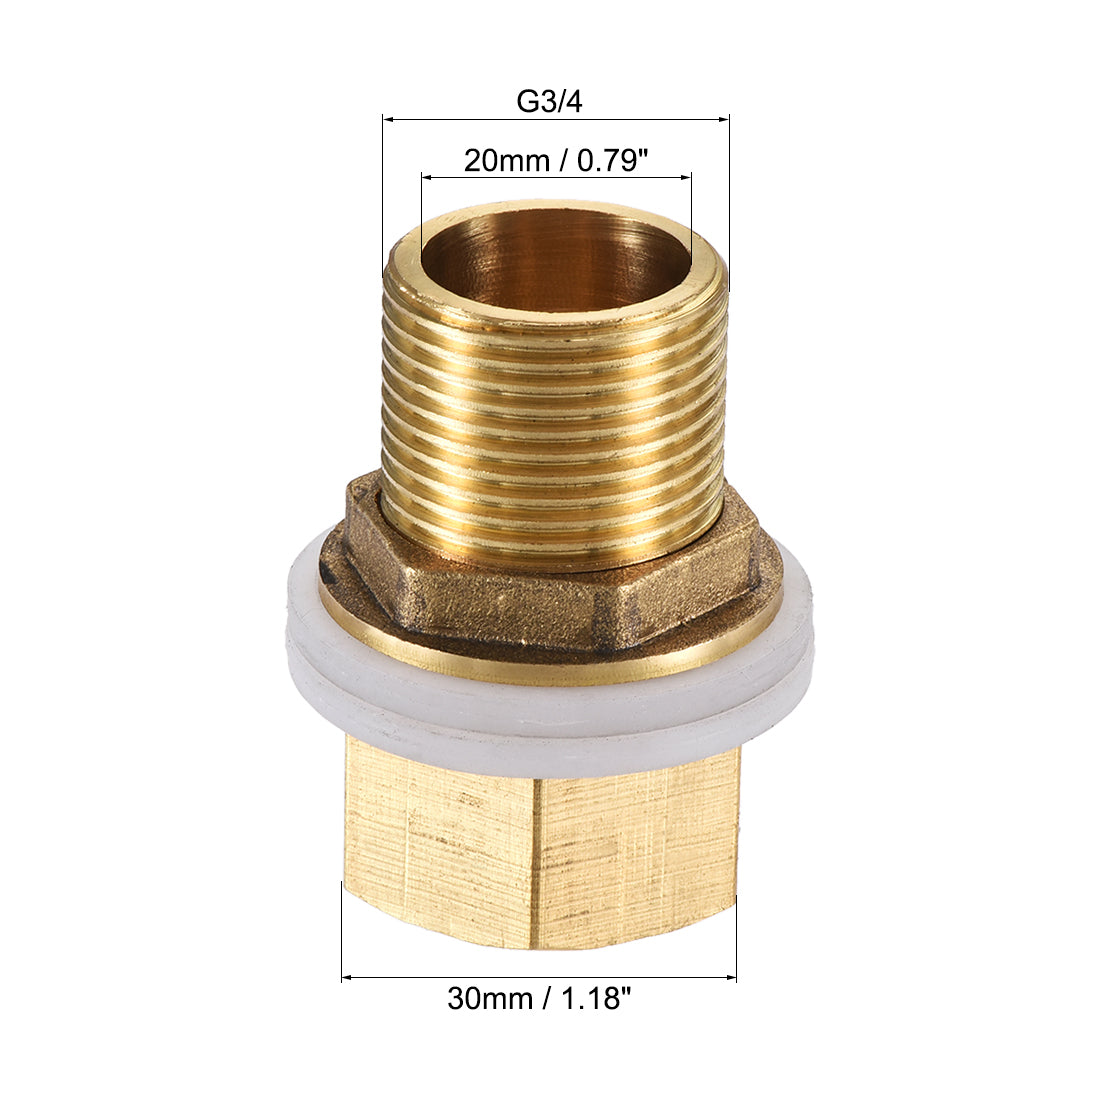 uxcell Uxcell Bulkhead Fitting, G3/4 Male 0.95" Female, Hex Tube Adaptor Hose Fitting, with Silicone Gaskets, for Water Tanks, Brass, Gold Tone